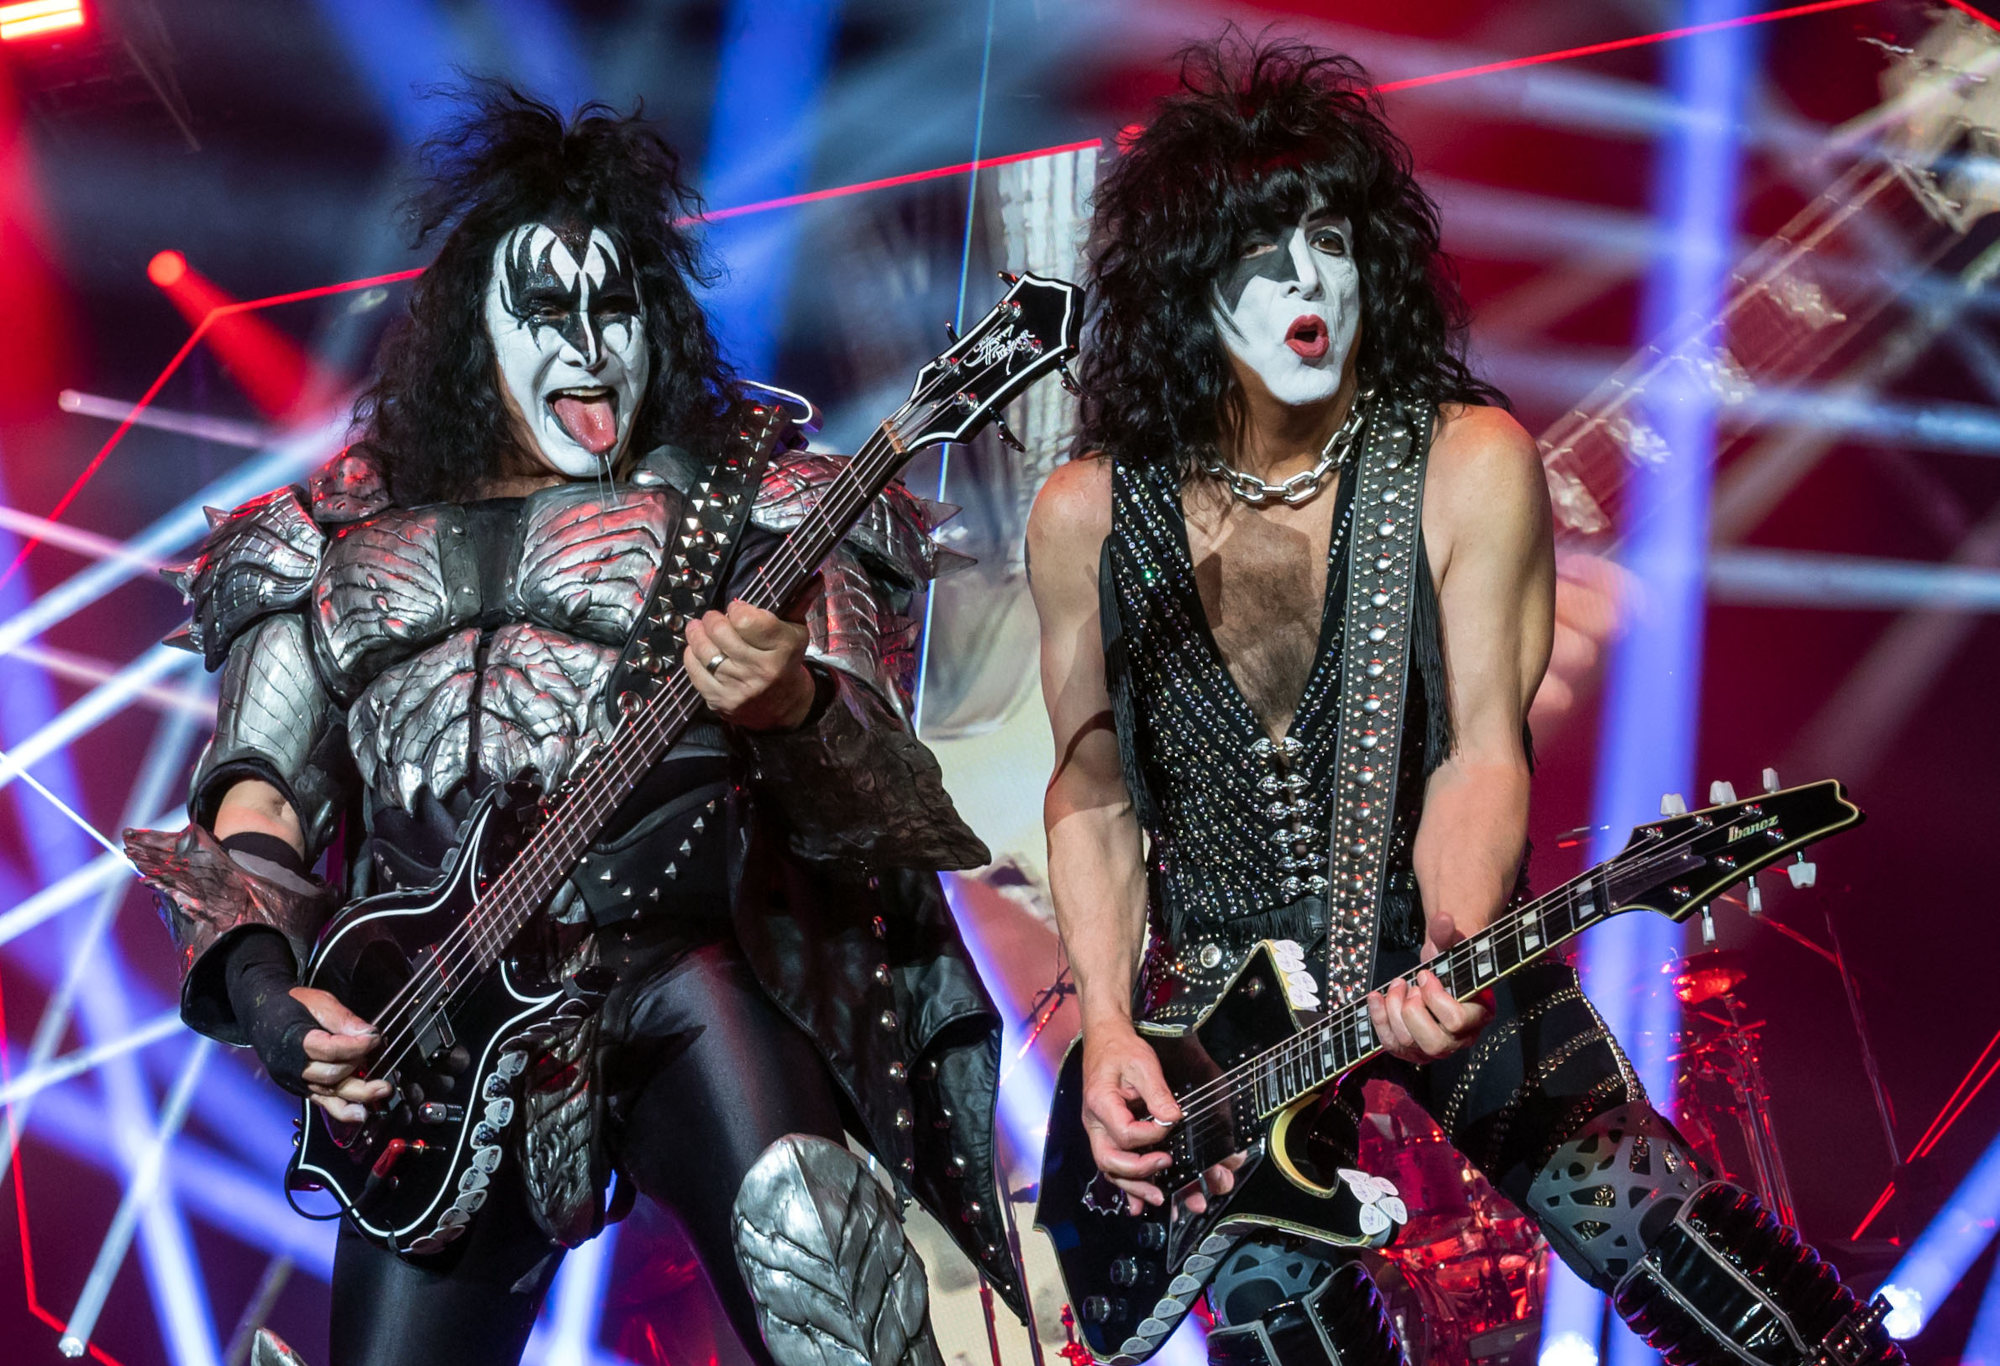 Rock band KISS will be the headline act at the 2023 AFL grand final.